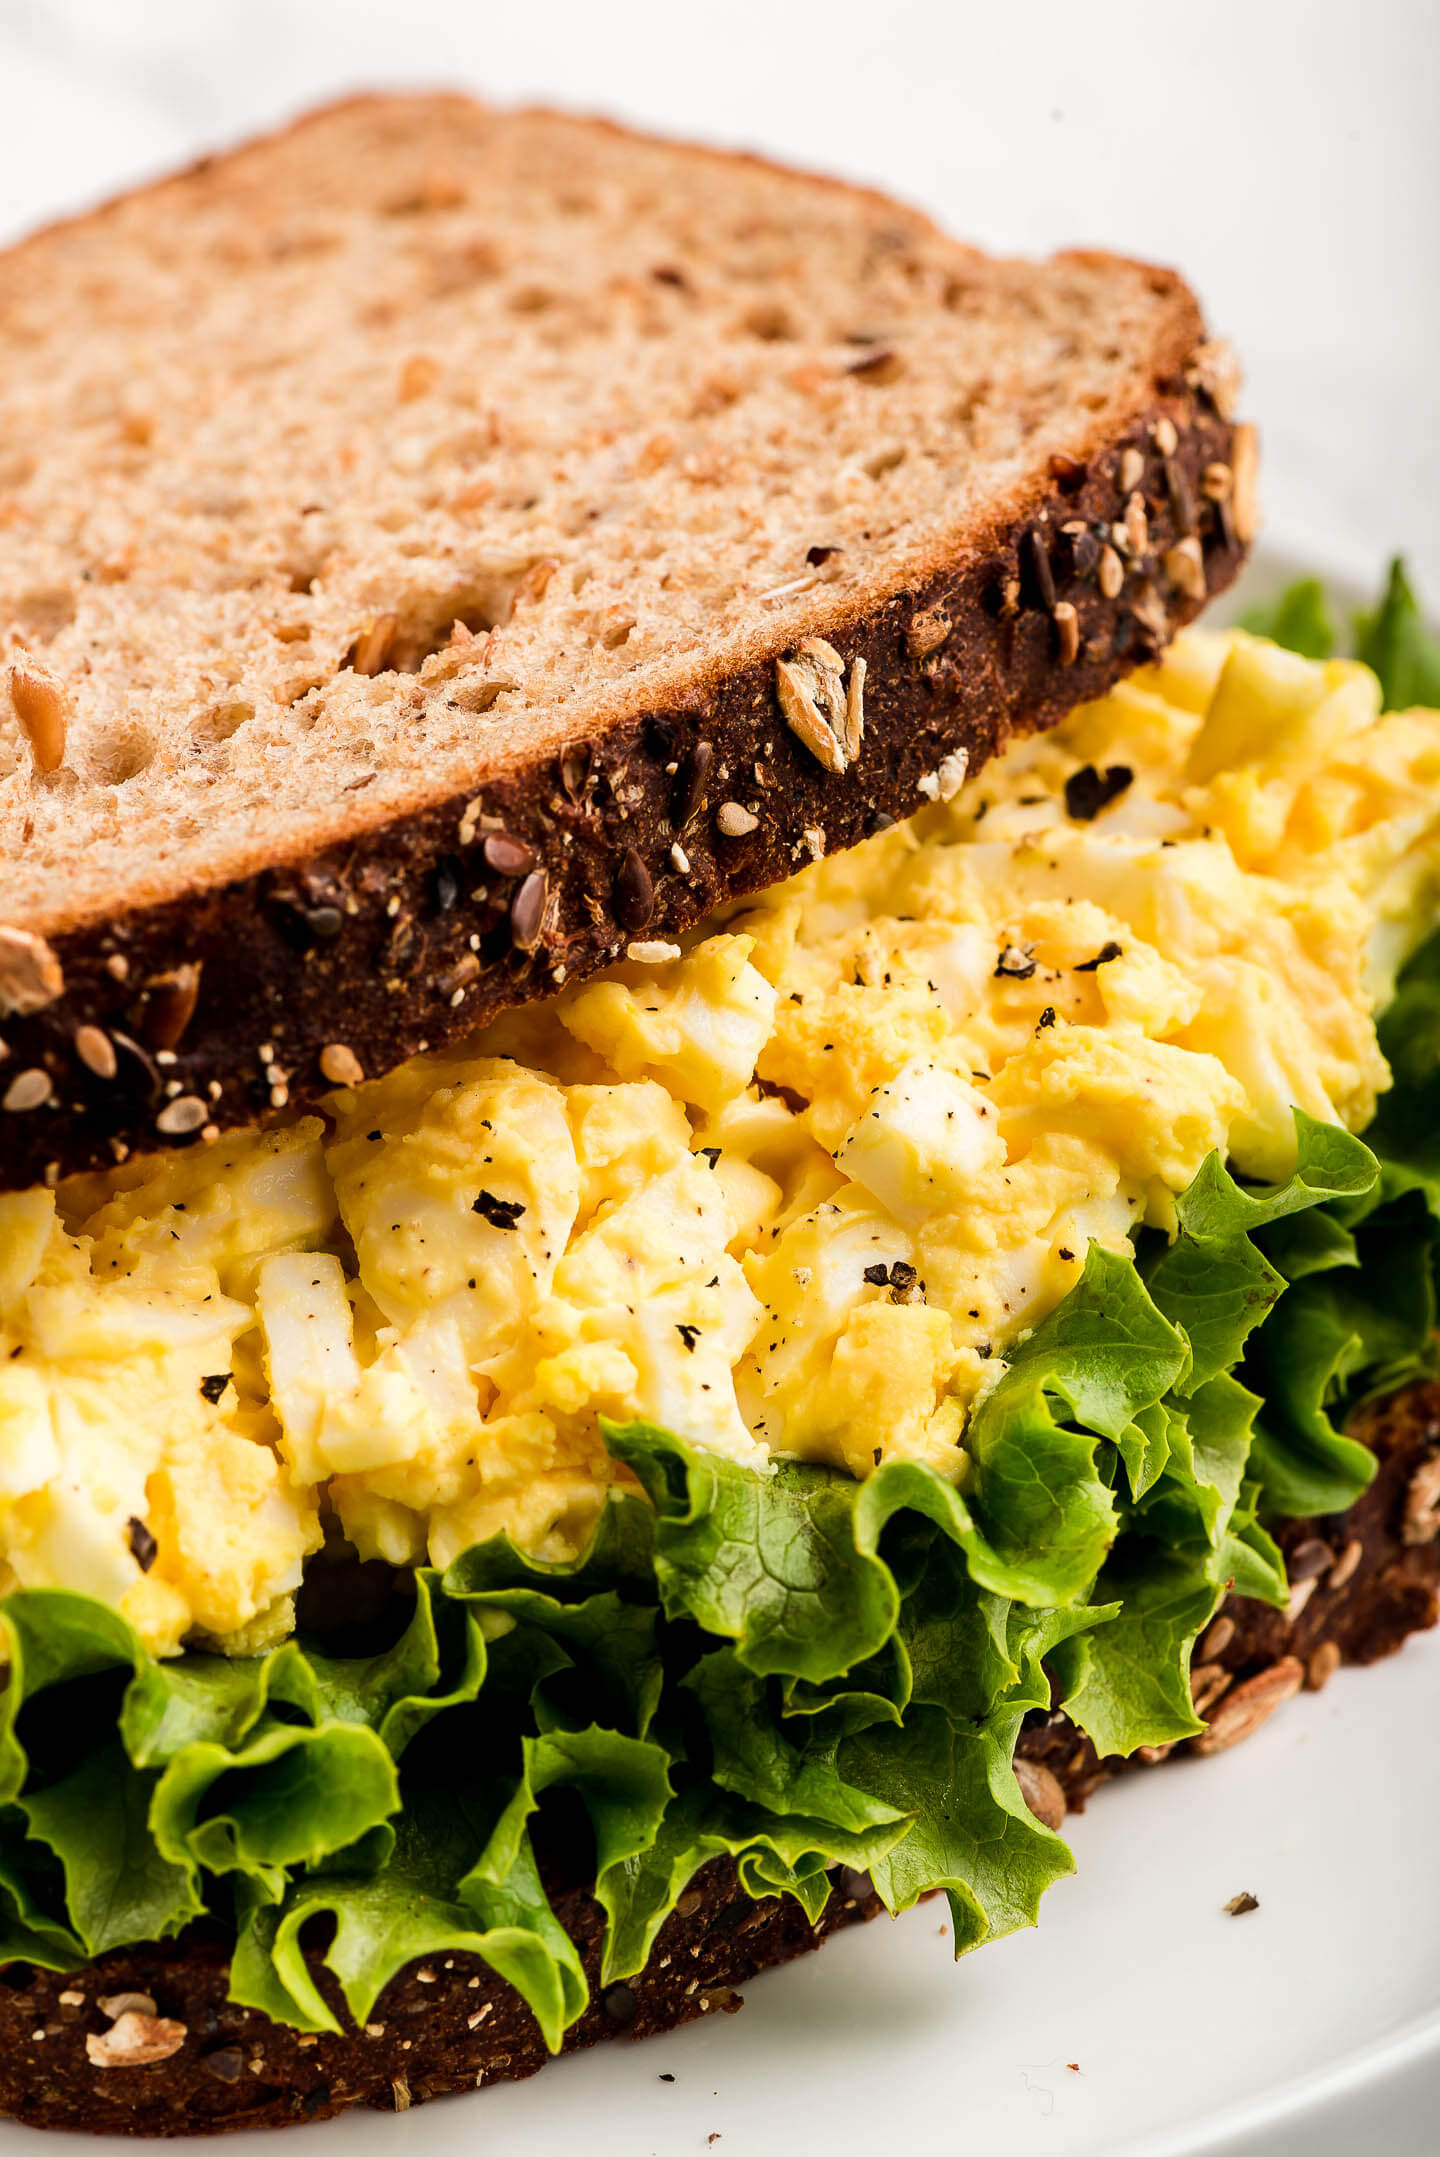 Egg salad on lettuce between two slices of whole grain bread.